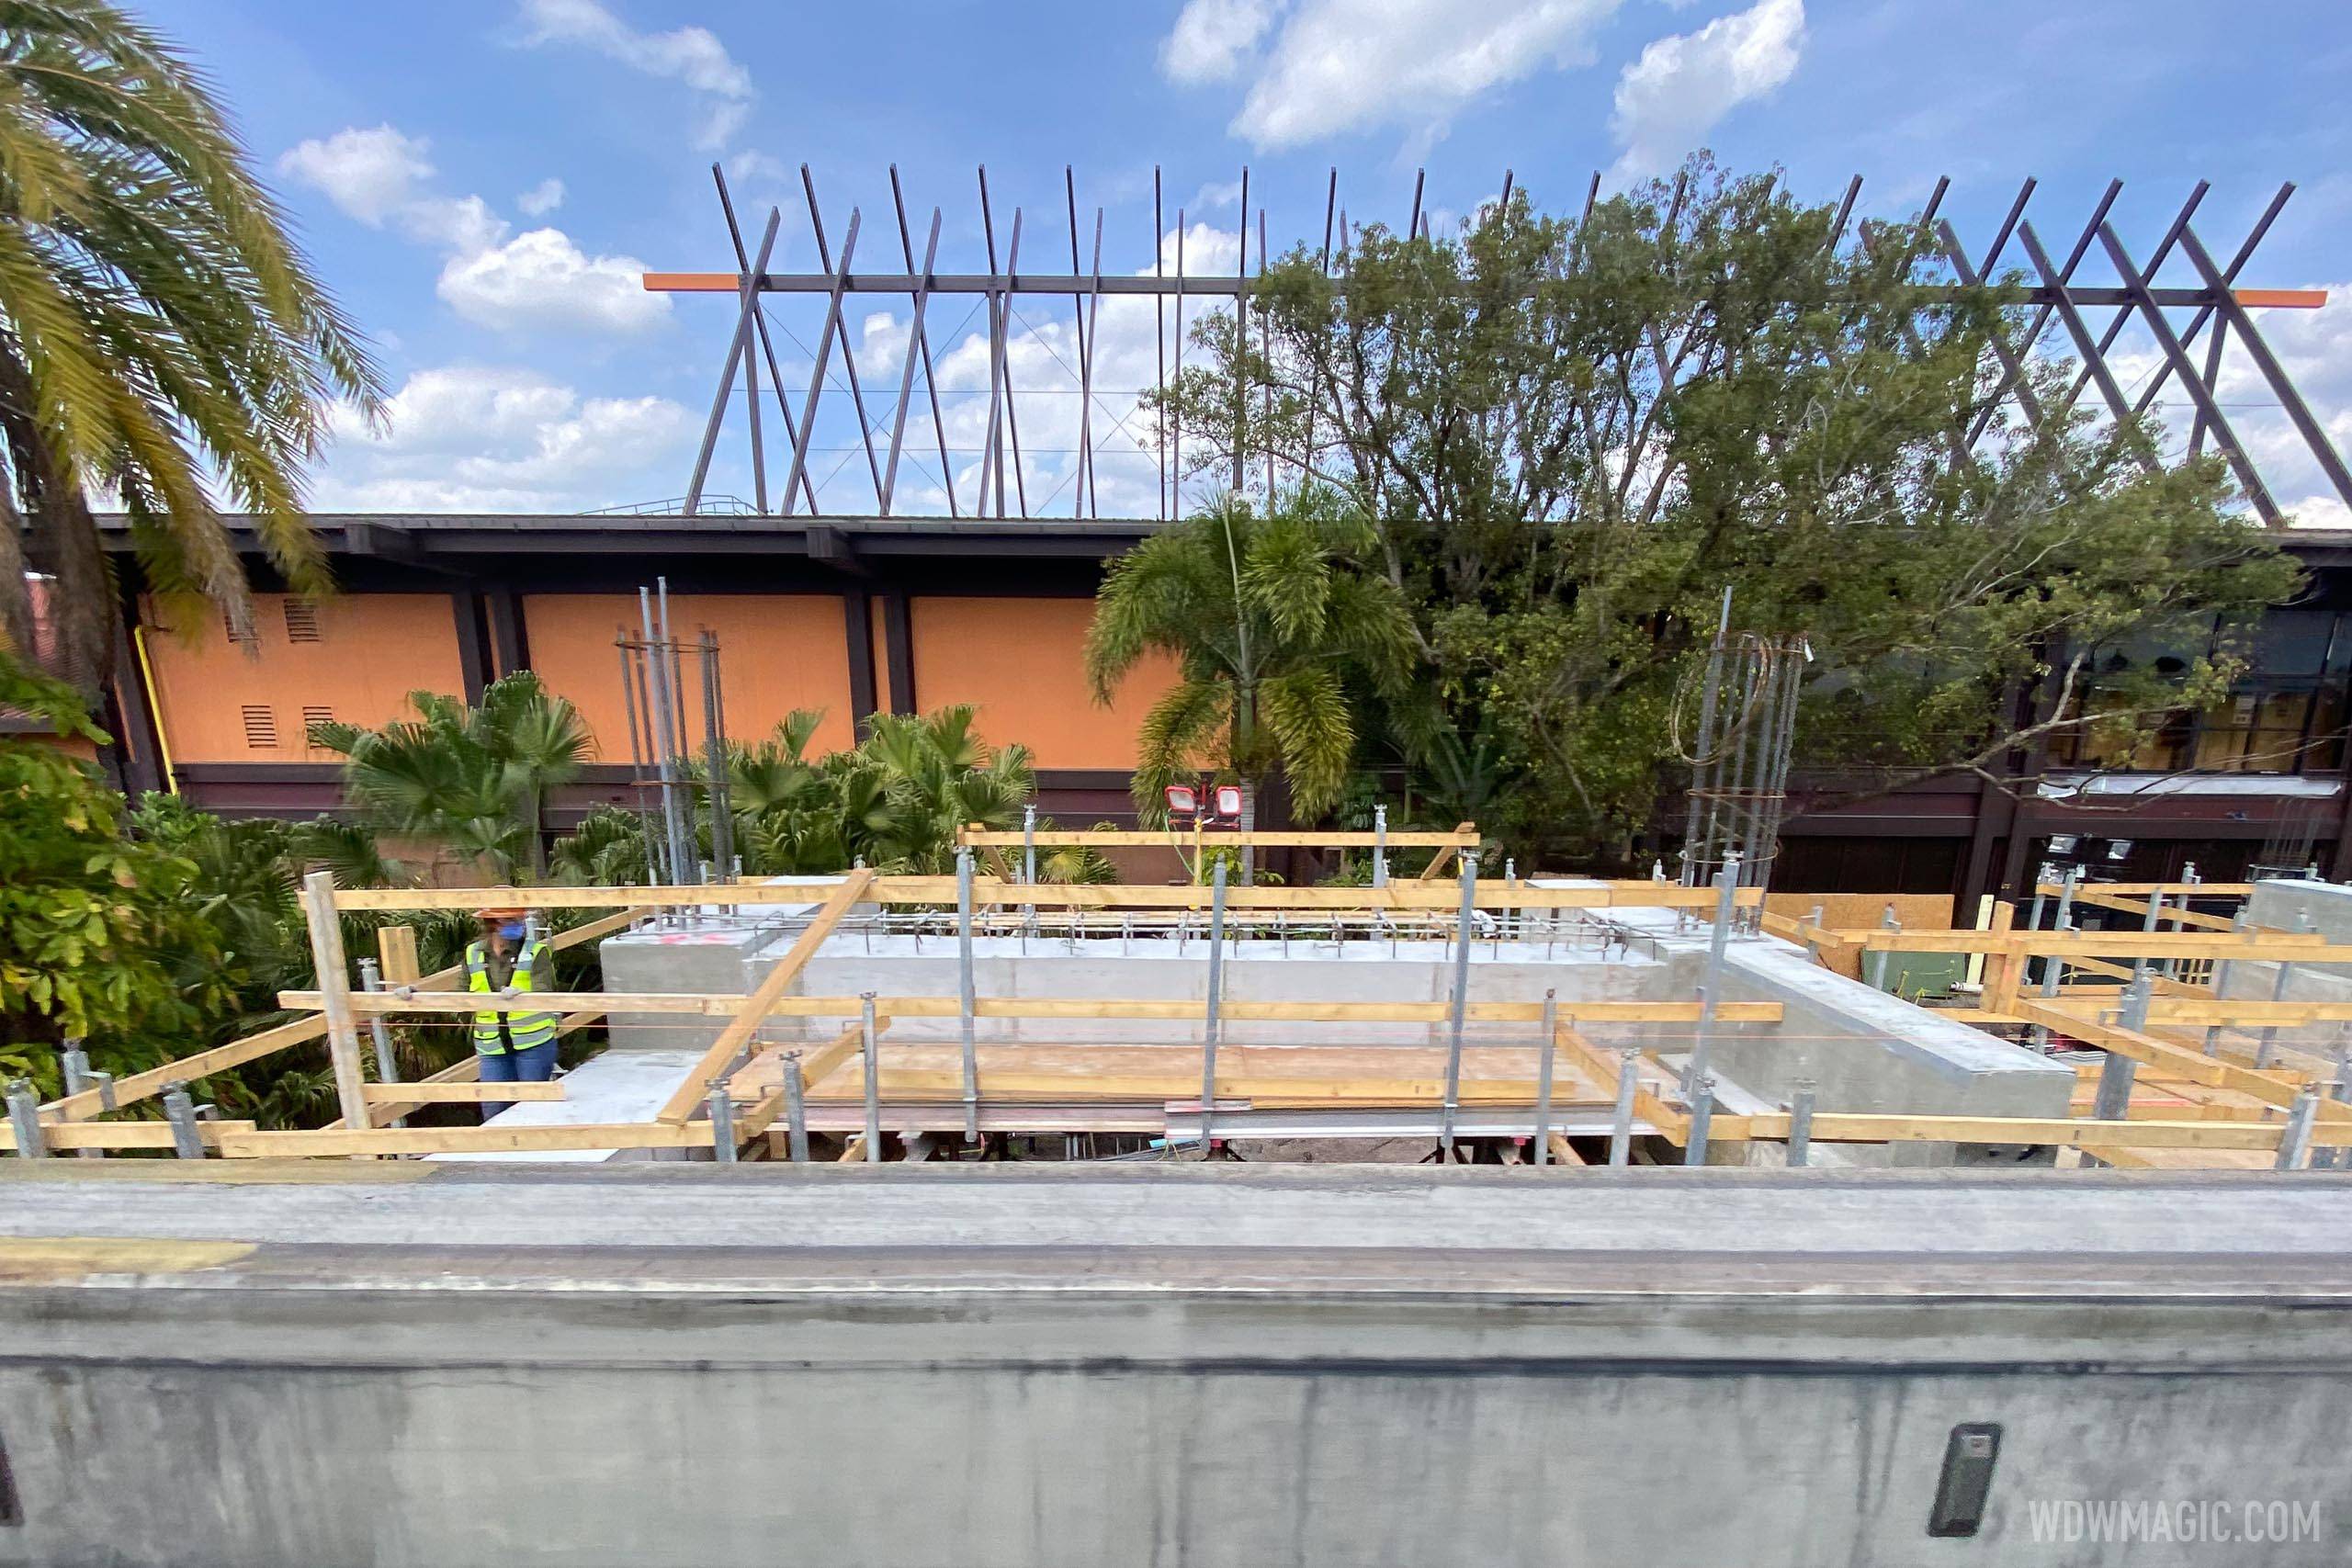 Polynesian Village Resort monorail station construction - March 22 2021